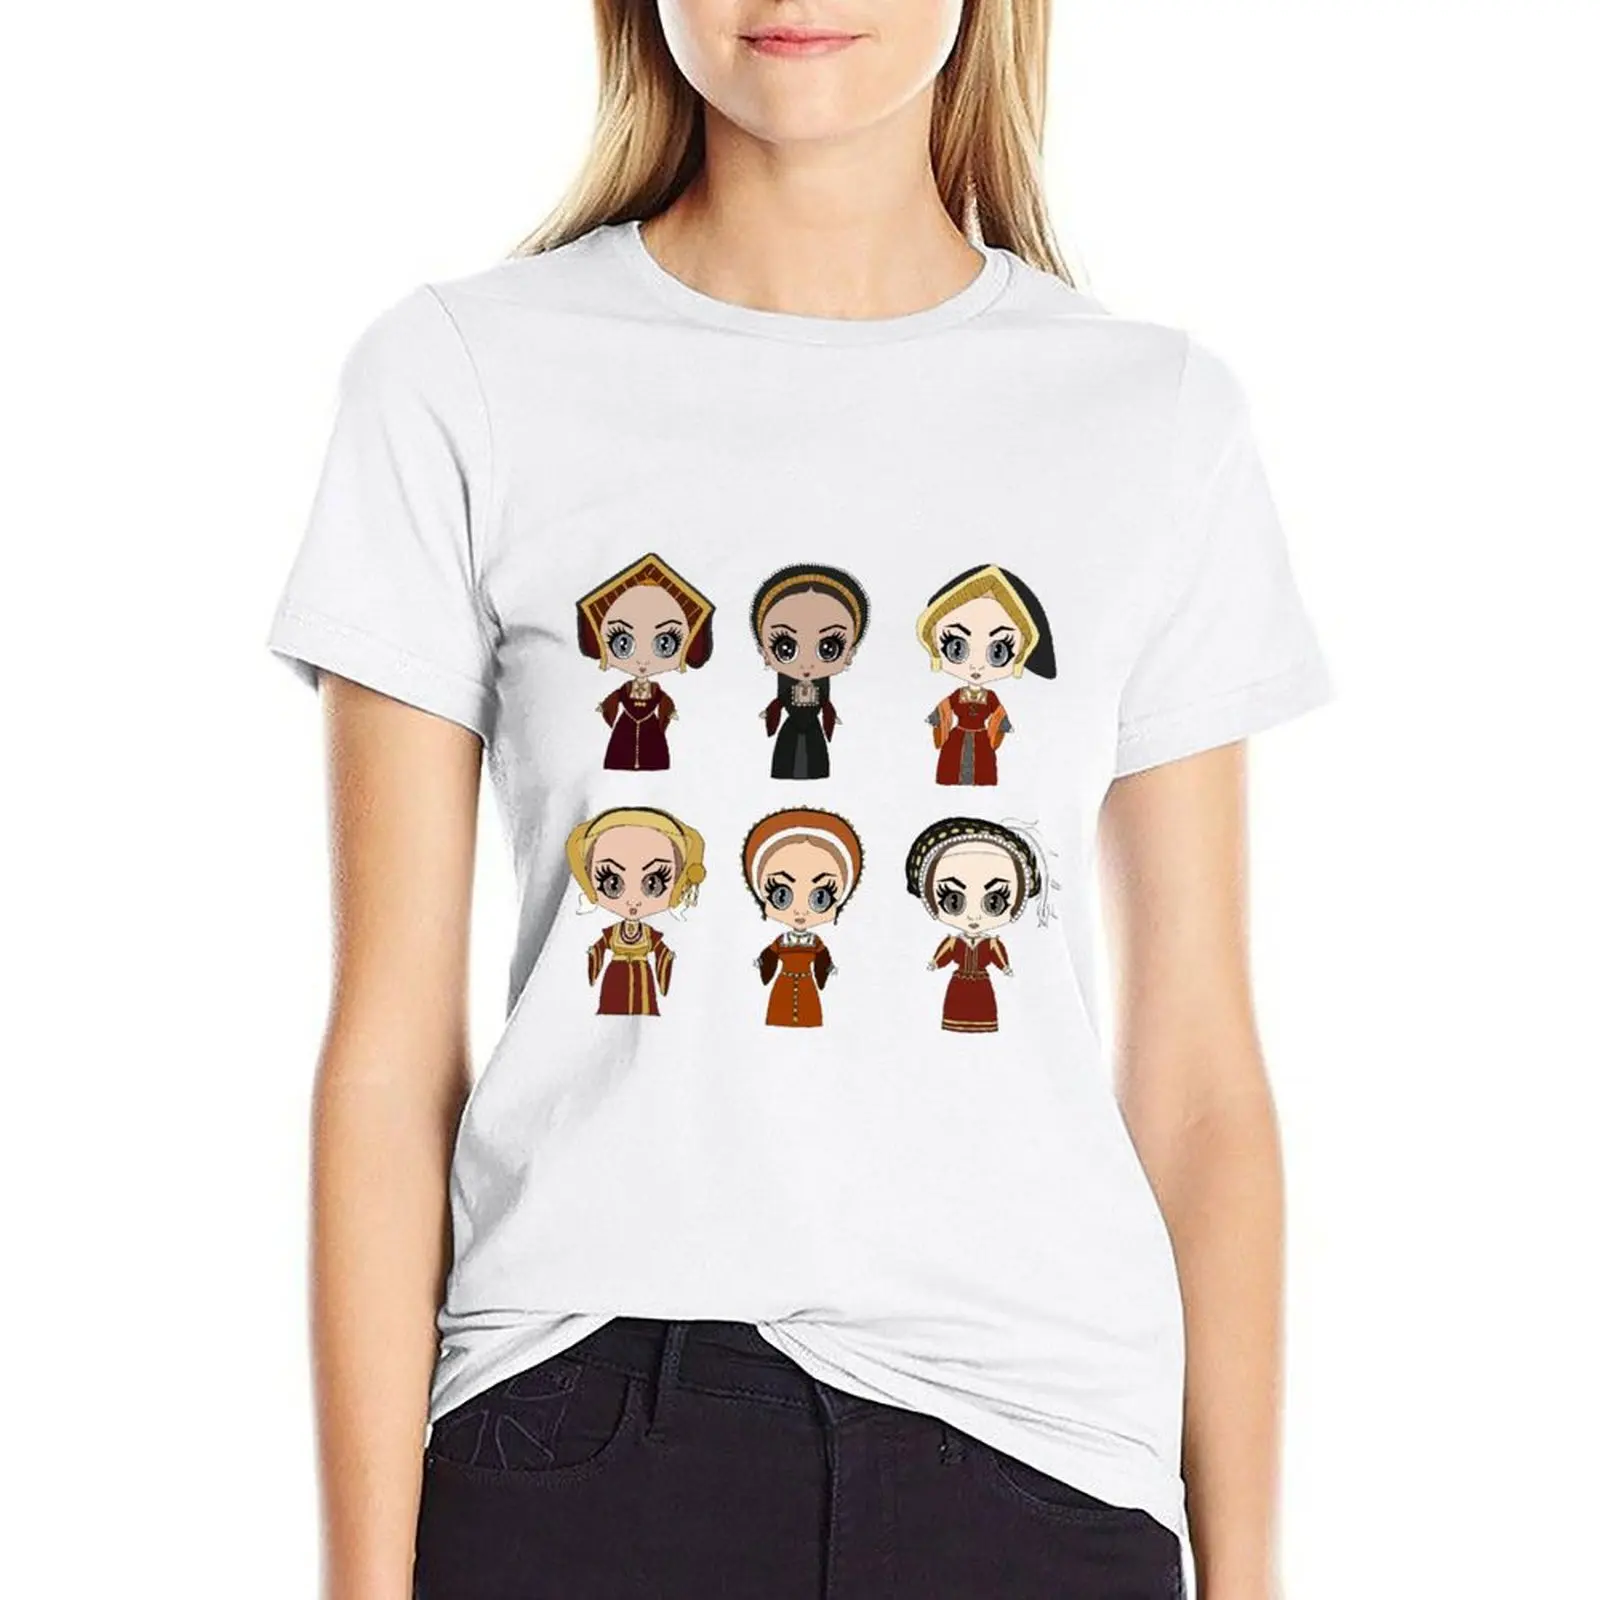 

The Six Wives of Henry VIII T-shirt kawaii clothes shirts graphic tees funny Summer Women's clothing